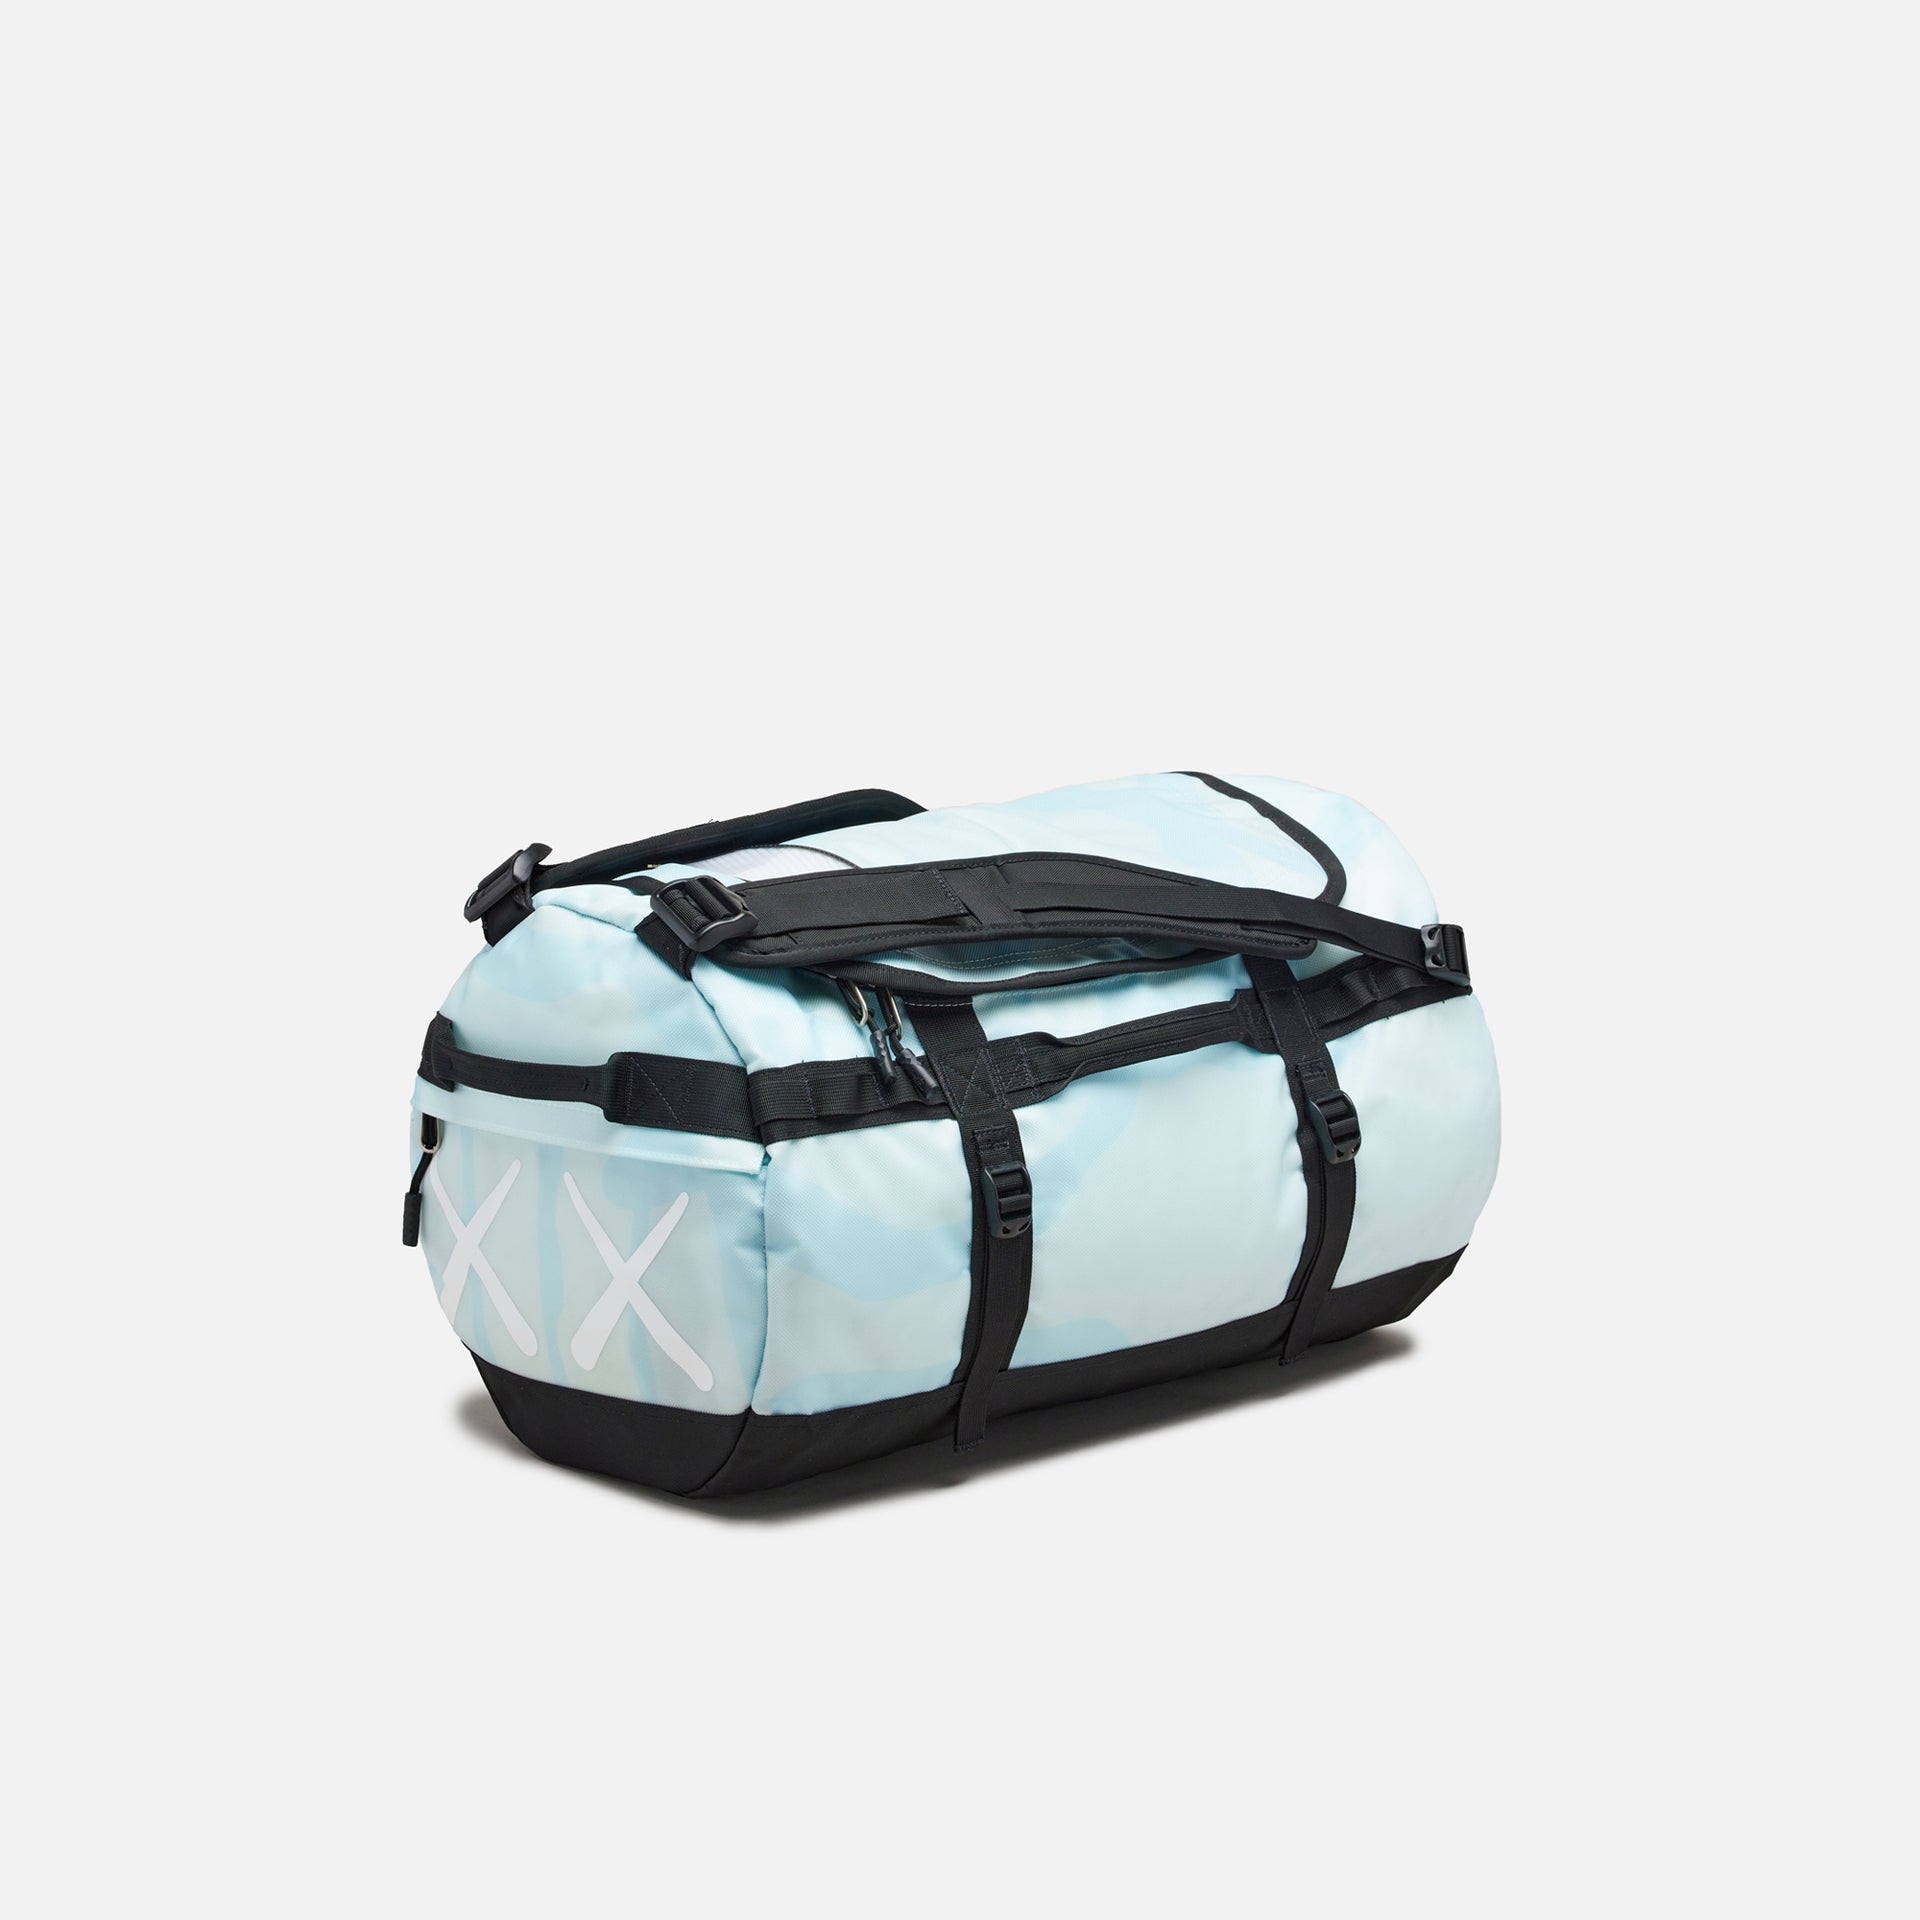 The North Face x Kaws Project Basecamp Duffel - Ice Blue